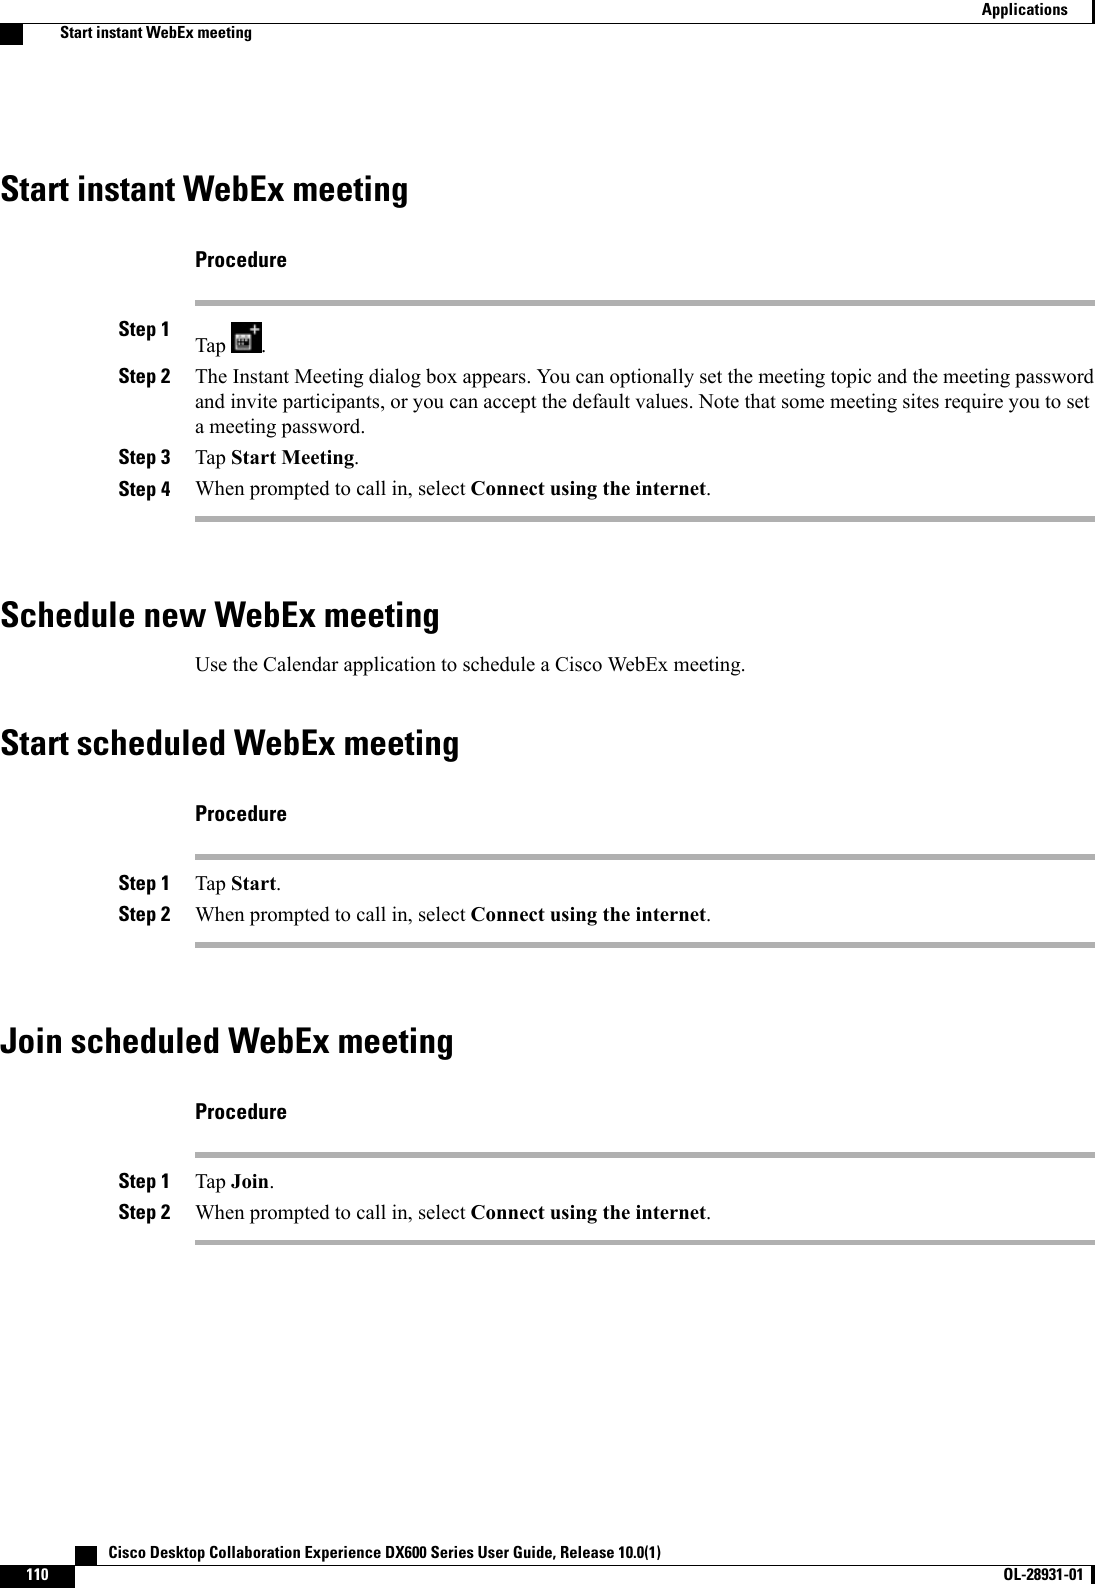 Start instant WebEx meetingProcedureStep 1 Tap .Step 2 The Instant Meeting dialog box appears. You can optionally set the meeting topic and the meeting passwordand invite participants, or you can accept the default values. Note that some meeting sites require you to seta meeting password.Step 3 Tap Start Meeting.Step 4 When prompted to call in, select Connect using the internet.Schedule new WebEx meetingUse the Calendar application to schedule a Cisco WebEx meeting.Start scheduled WebEx meetingProcedureStep 1 Tap Start.Step 2 When prompted to call in, select Connect using the internet.Join scheduled WebEx meetingProcedureStep 1 Tap Join.Step 2 When prompted to call in, select Connect using the internet.   Cisco Desktop Collaboration Experience DX600 Series User Guide, Release 10.0(1)110 OL-28931-01  ApplicationsStart instant WebEx meeting